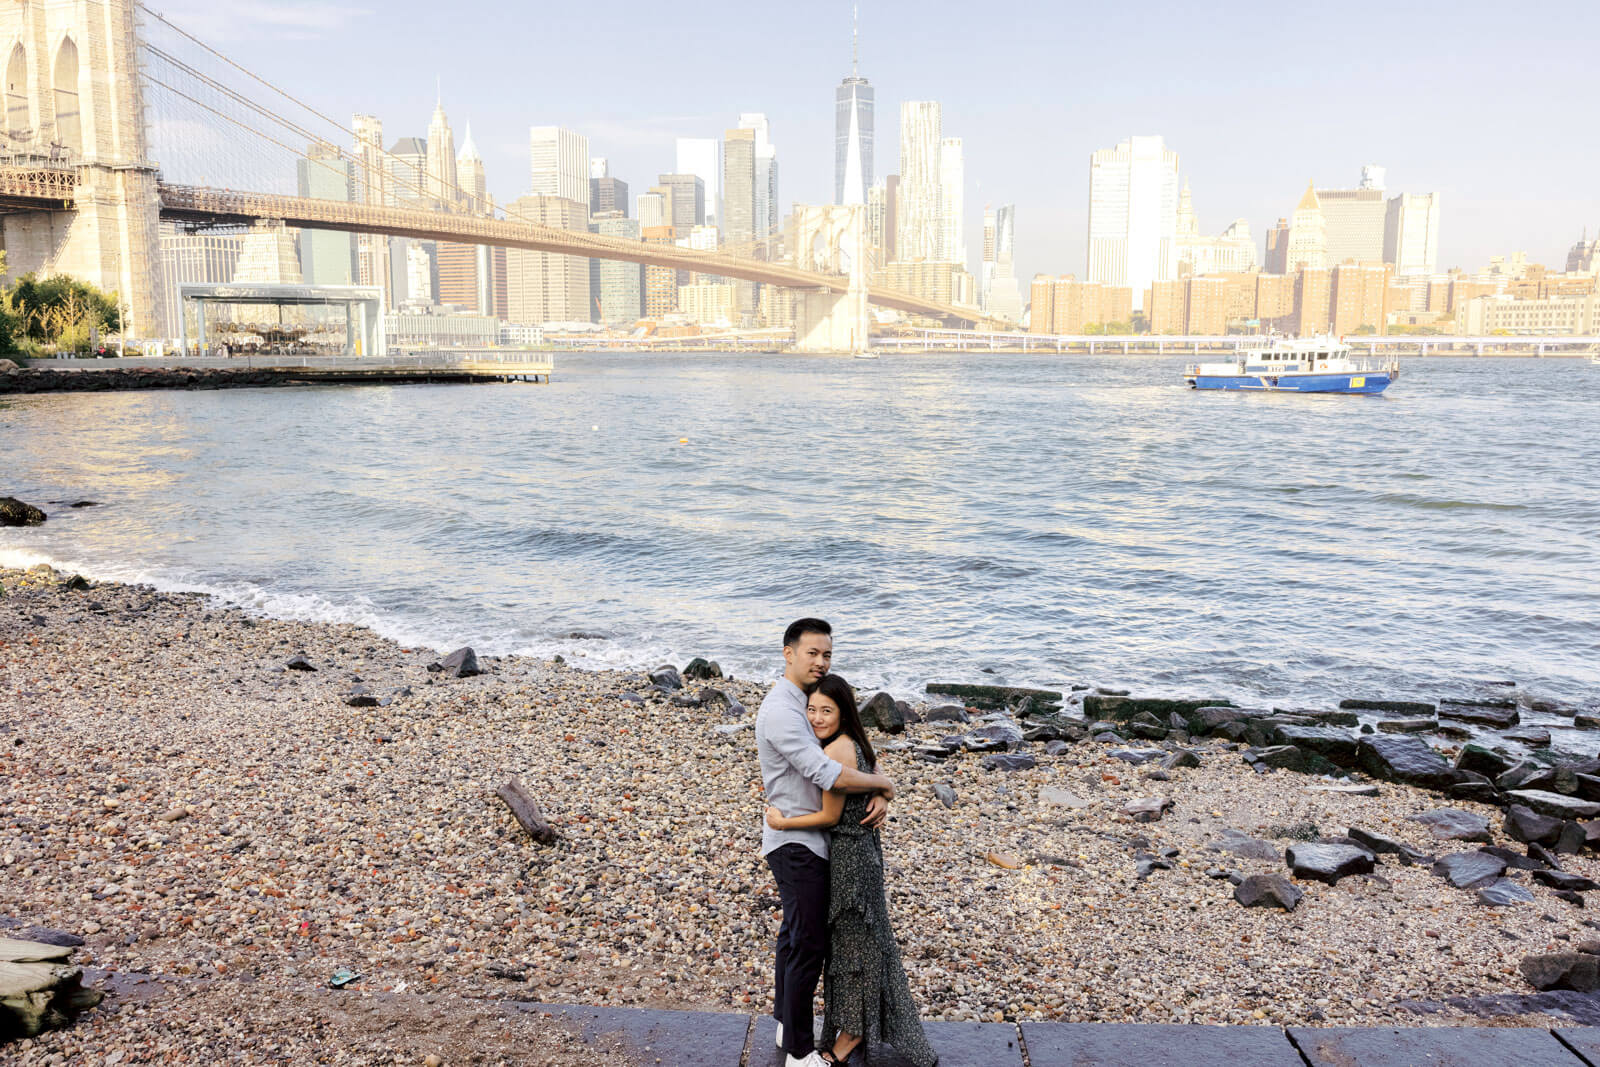 The engaged couple is in the riverside with the Brooklyn Bridge and buildings in the background. Image by Jenny Fu Studio